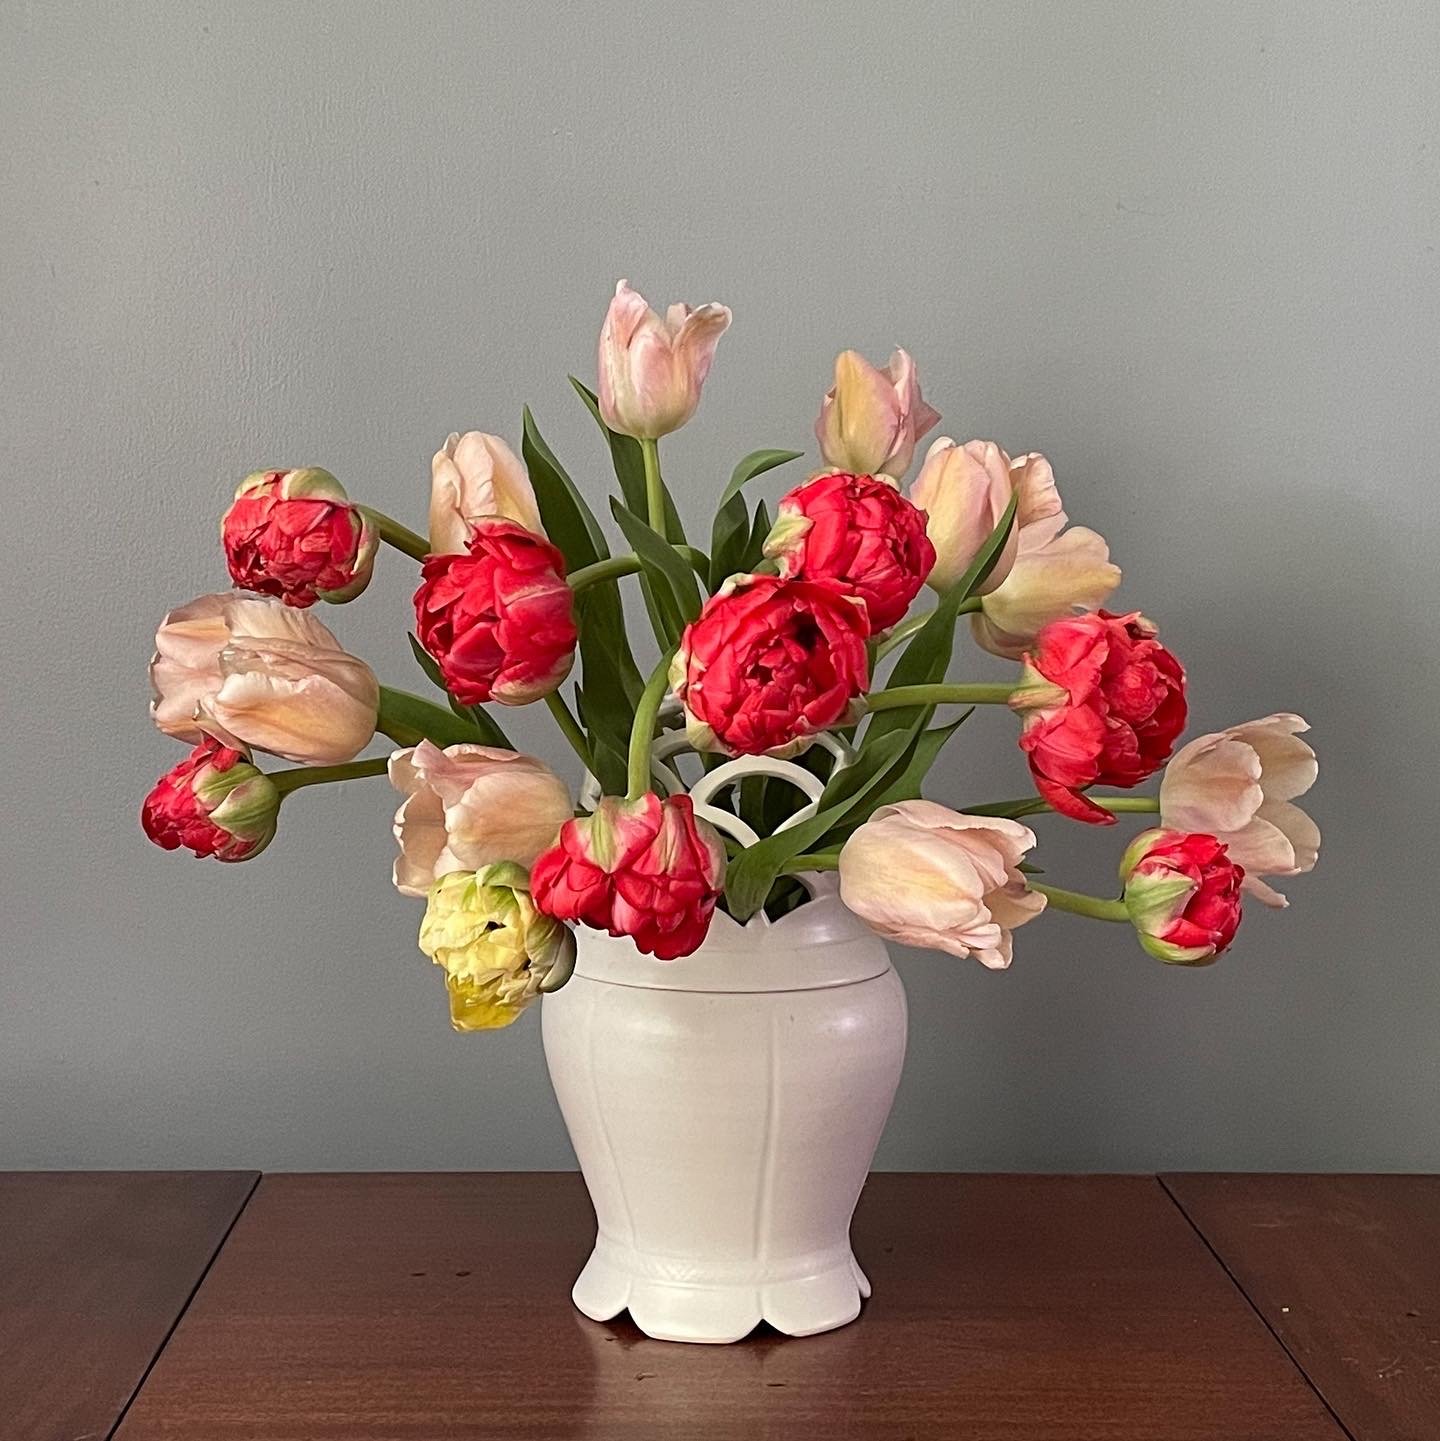 Scalloped Vase with Tulips